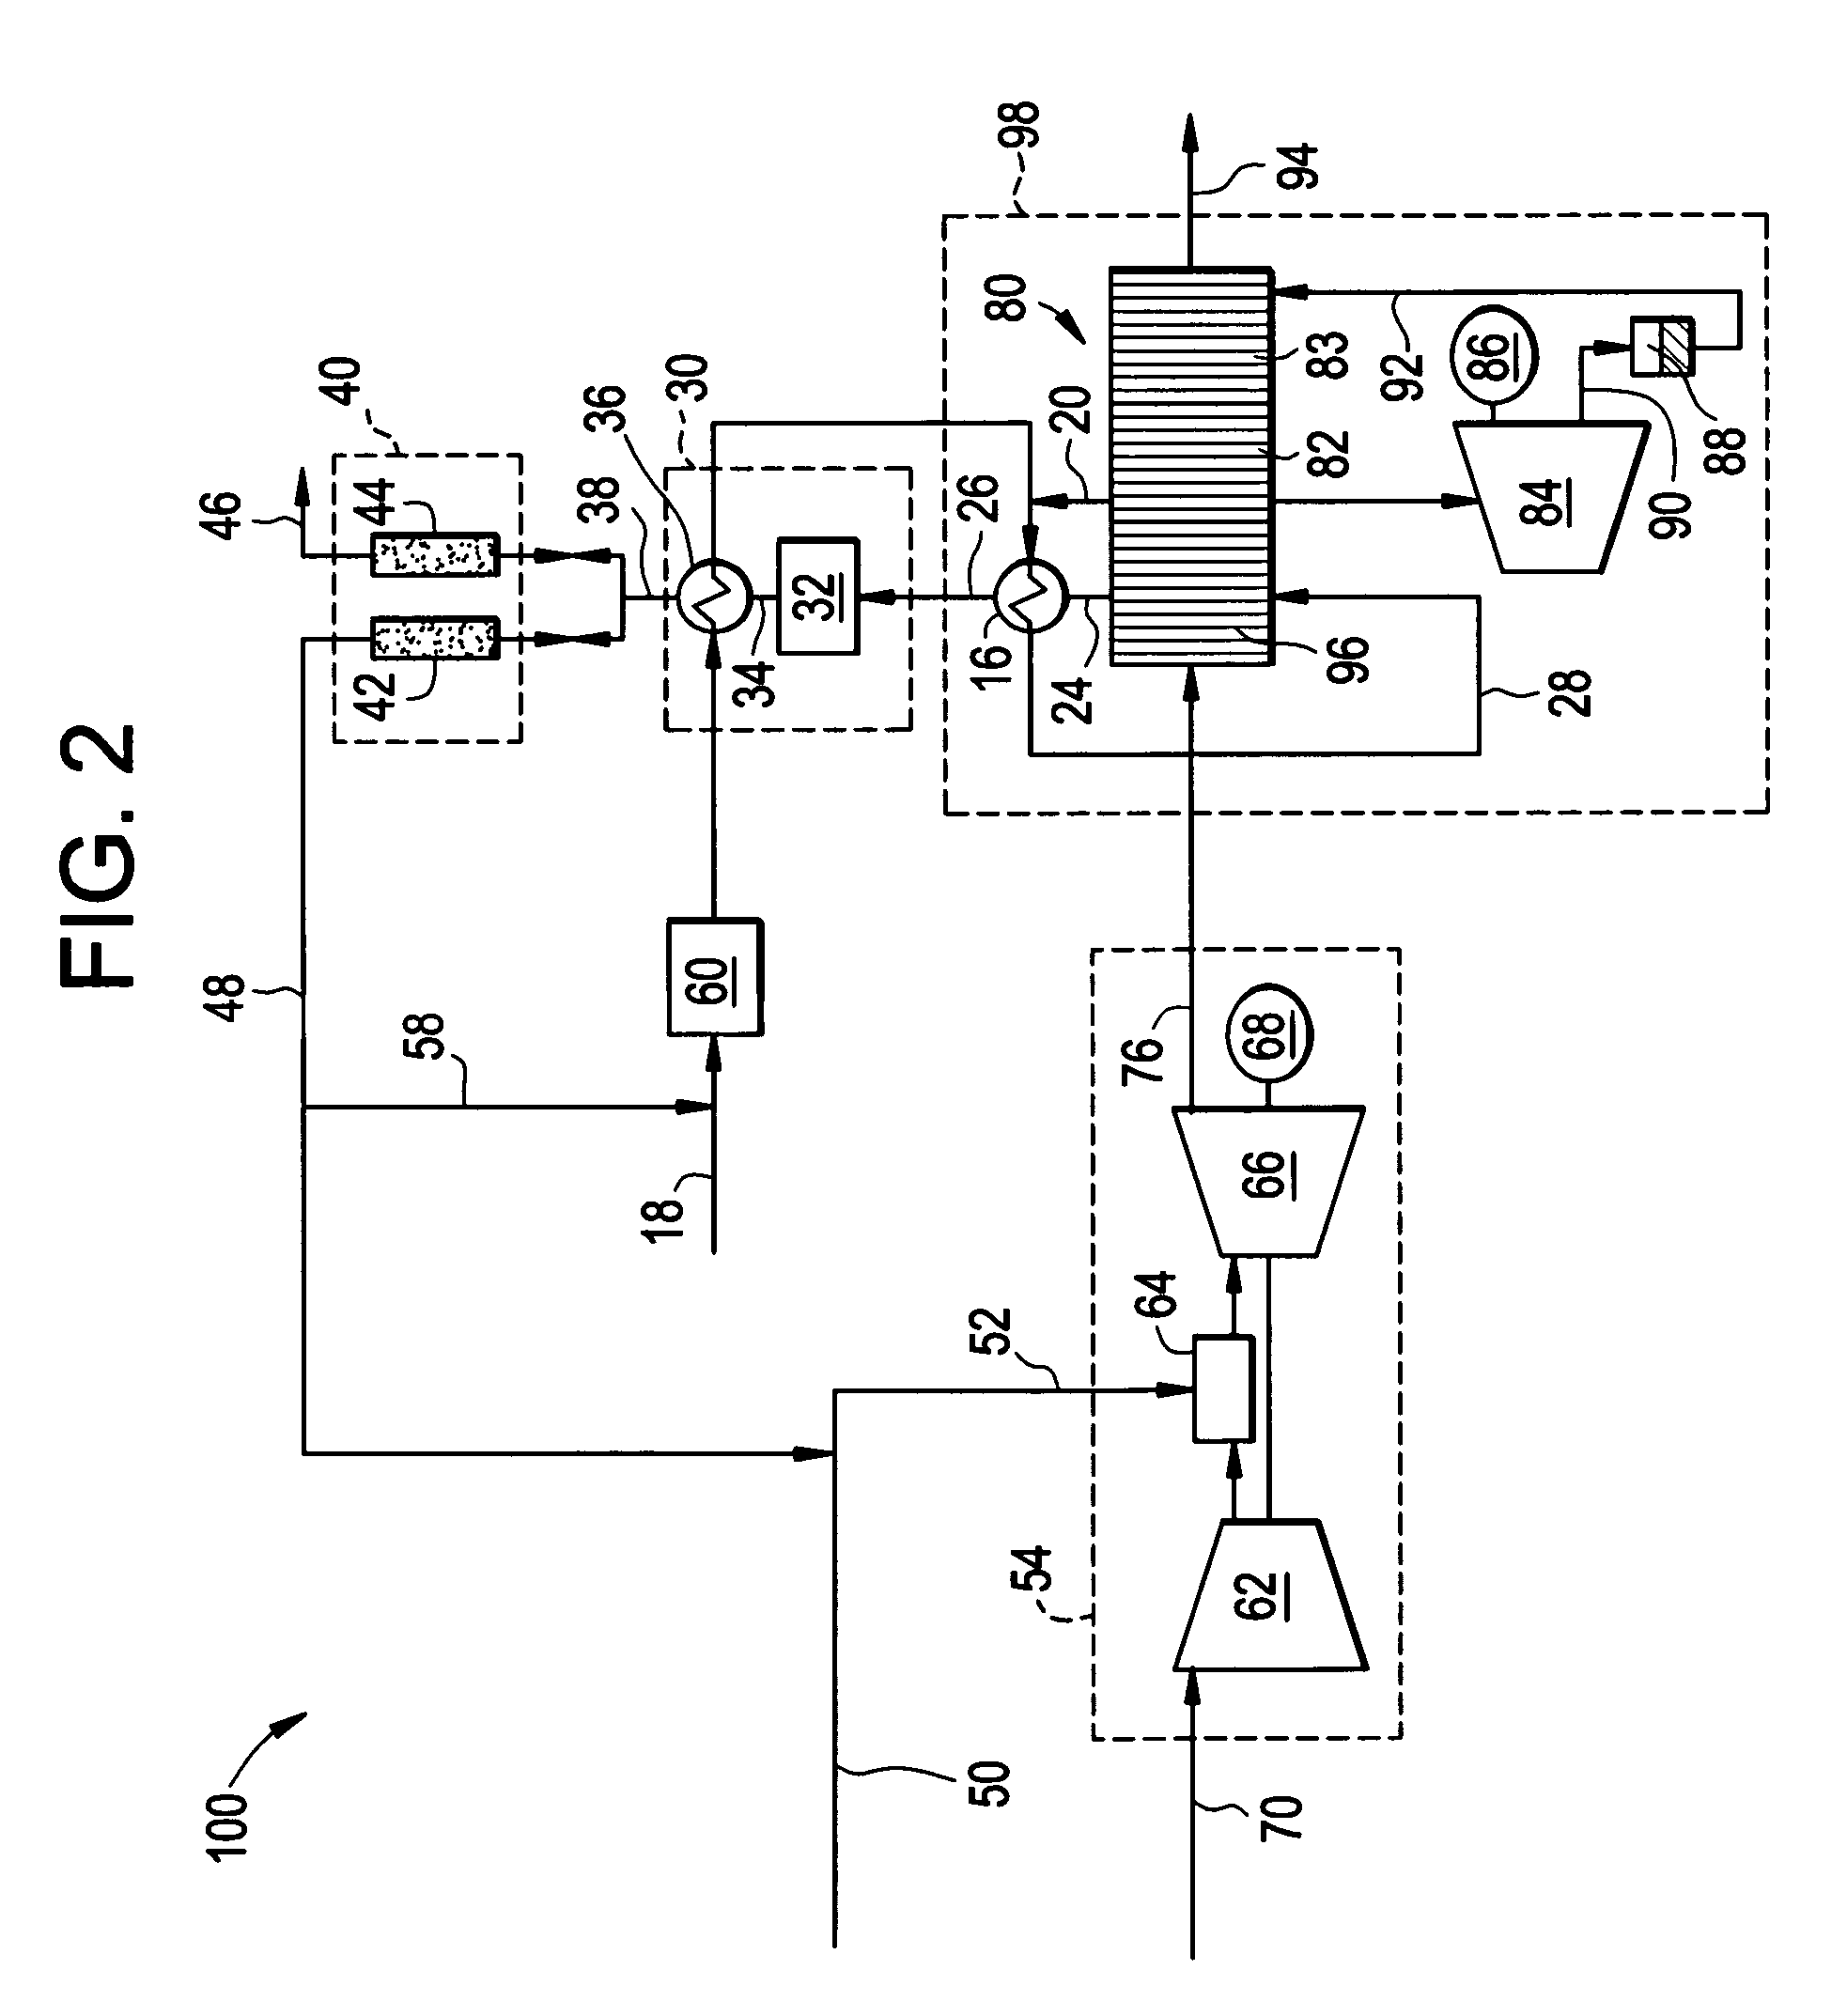 Reforming system for combined cycle plant with partial CO2 capture